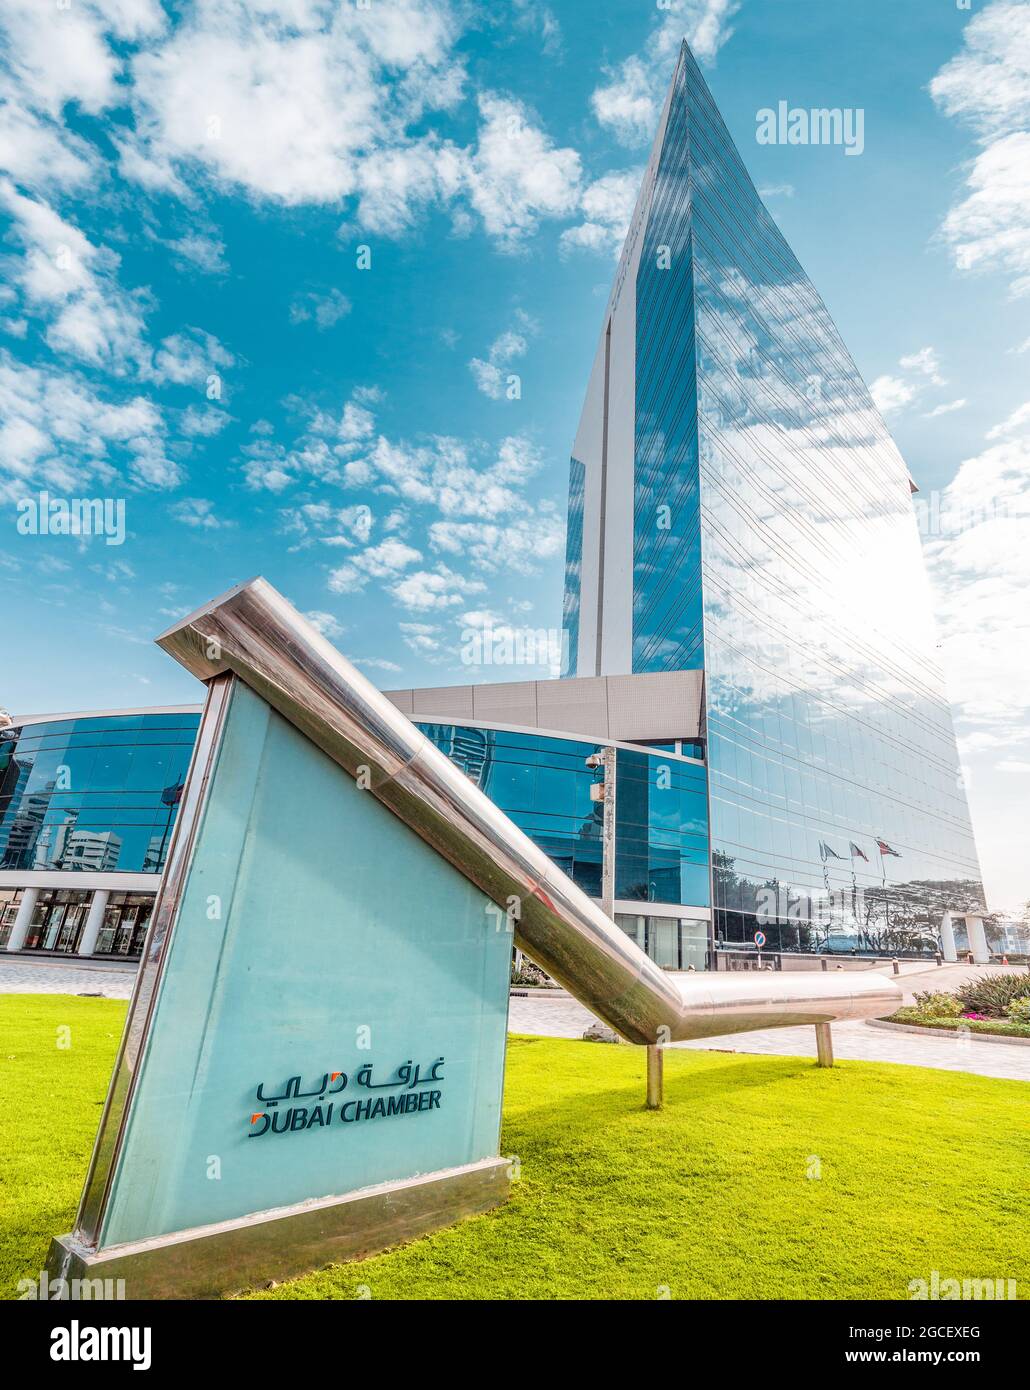 23 February 2021, Dubai, UAE: Dubai Chamber of Commerce and Industry - organization dedicated to supporting and developing the business community Stock Photo